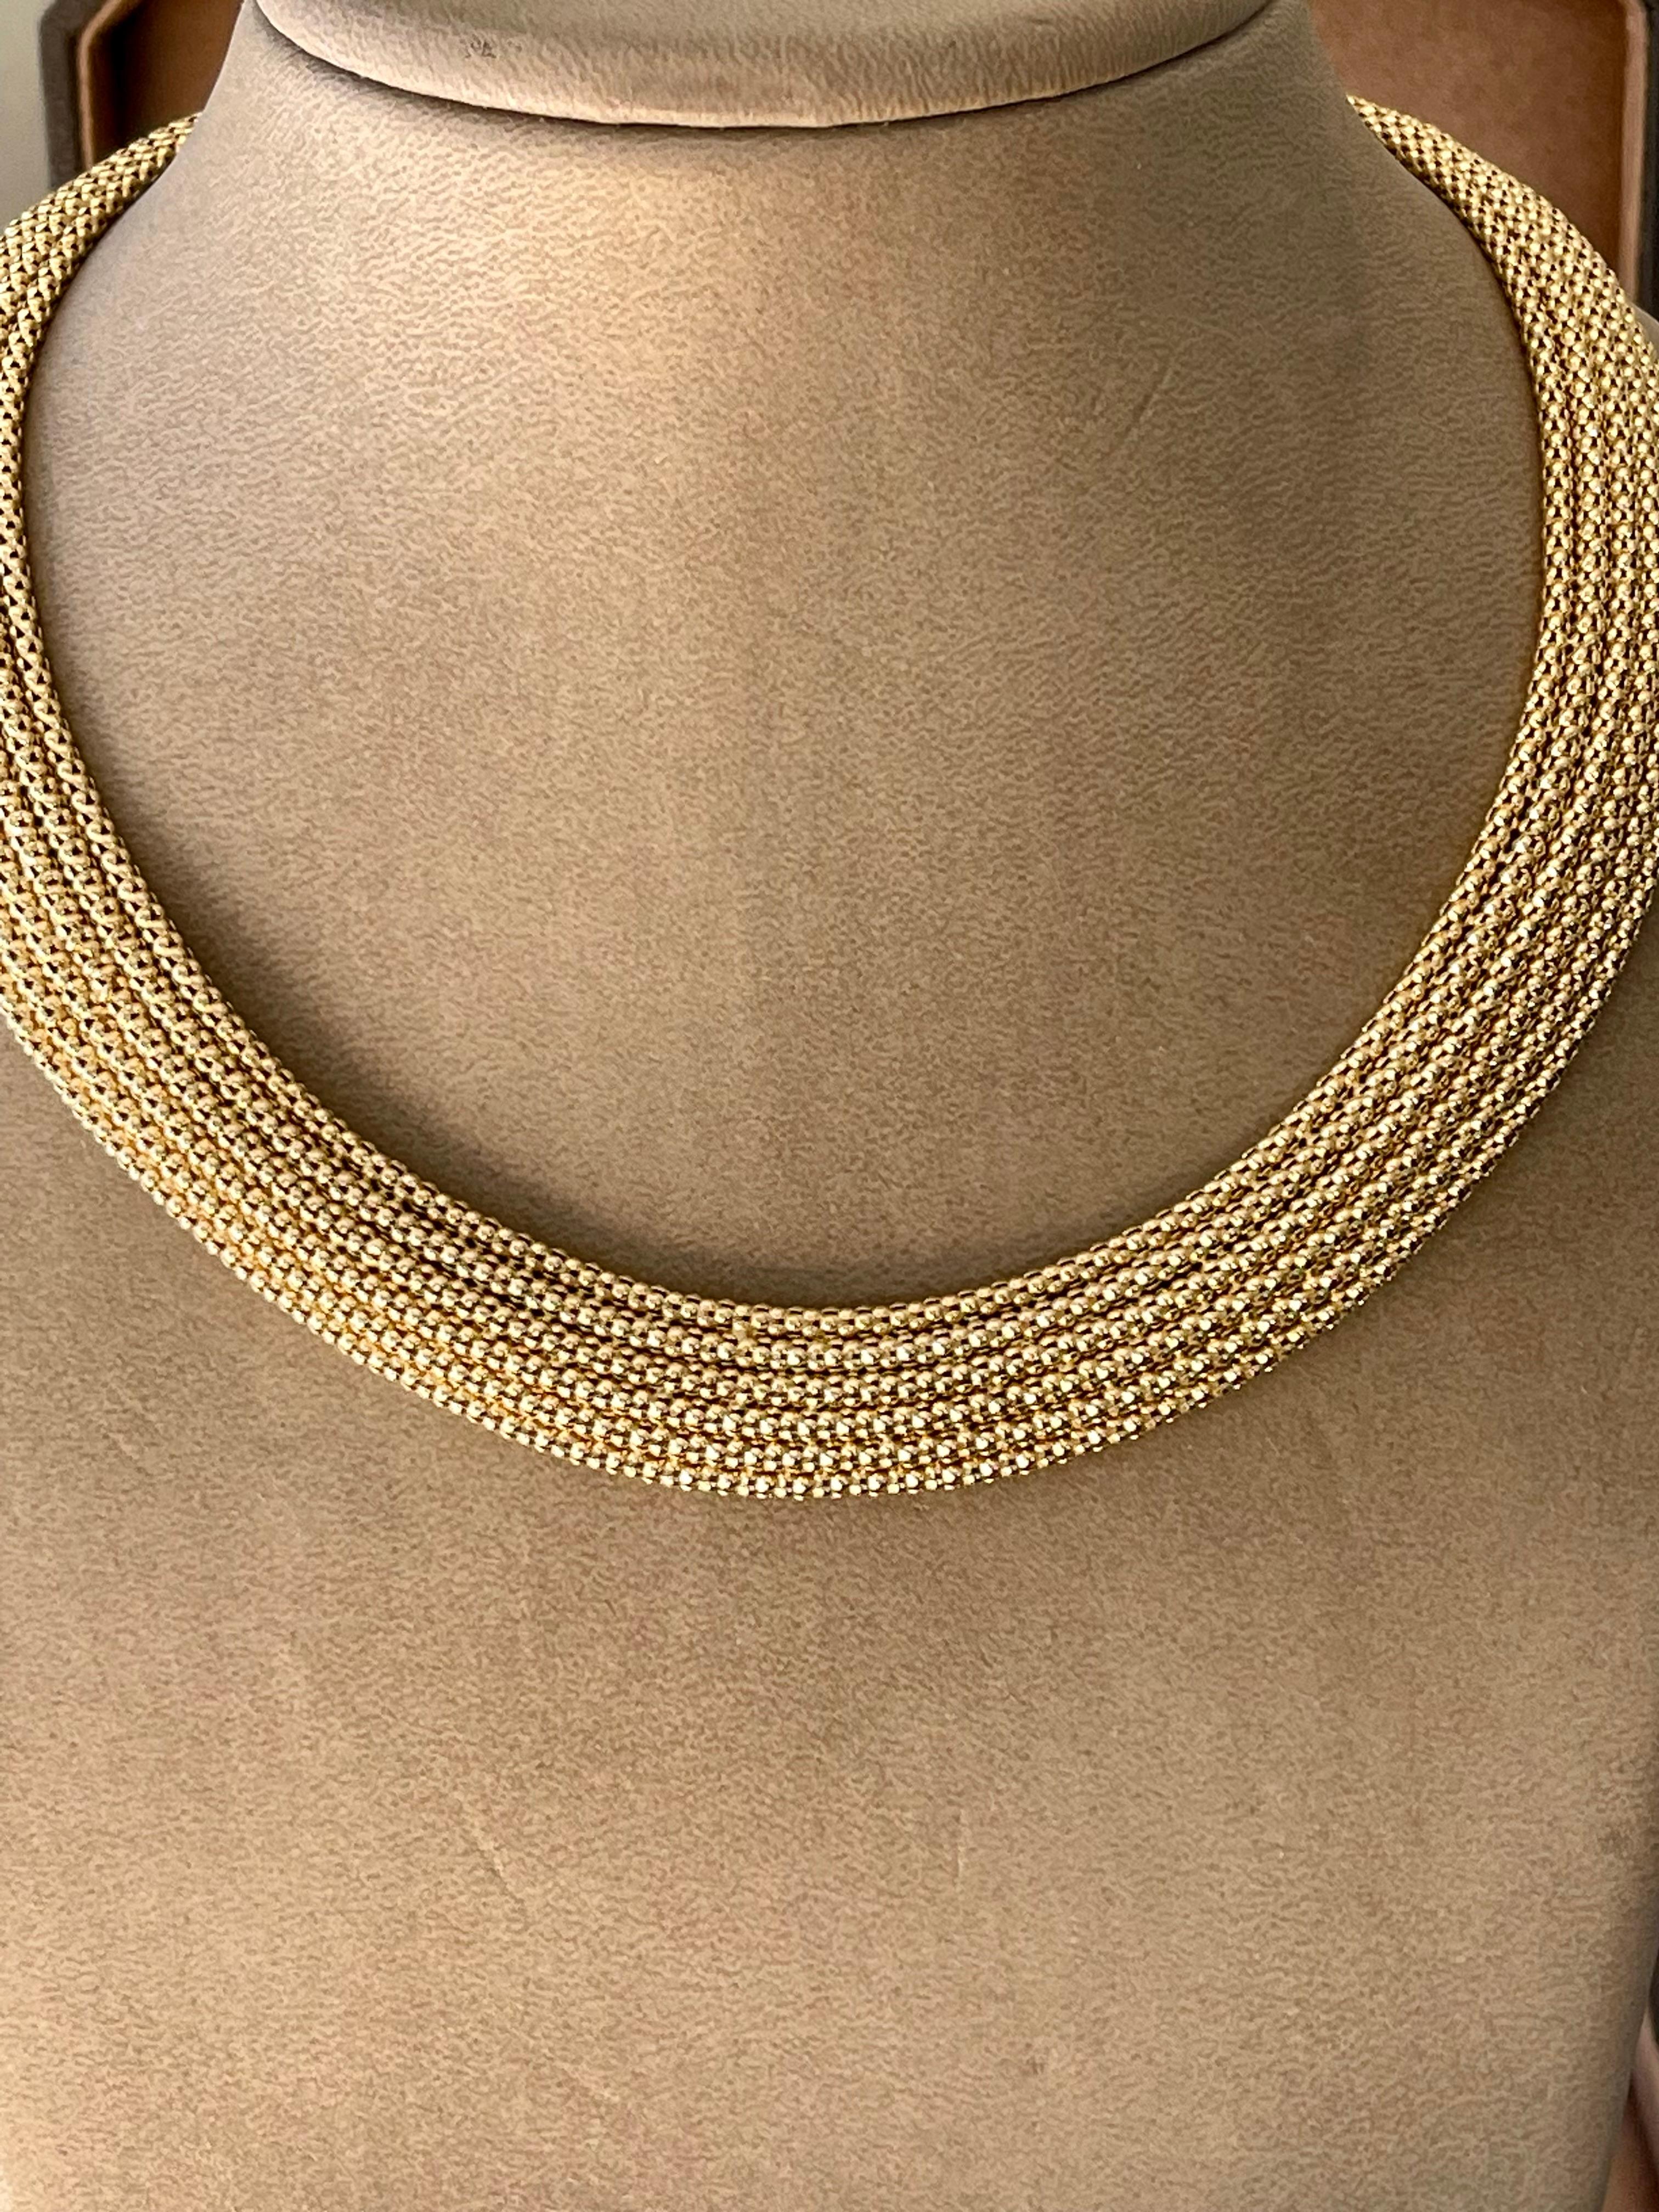 Italian 18 K Yellow Gold Flexible Mesh Necklace by UnoAErre For Sale 2